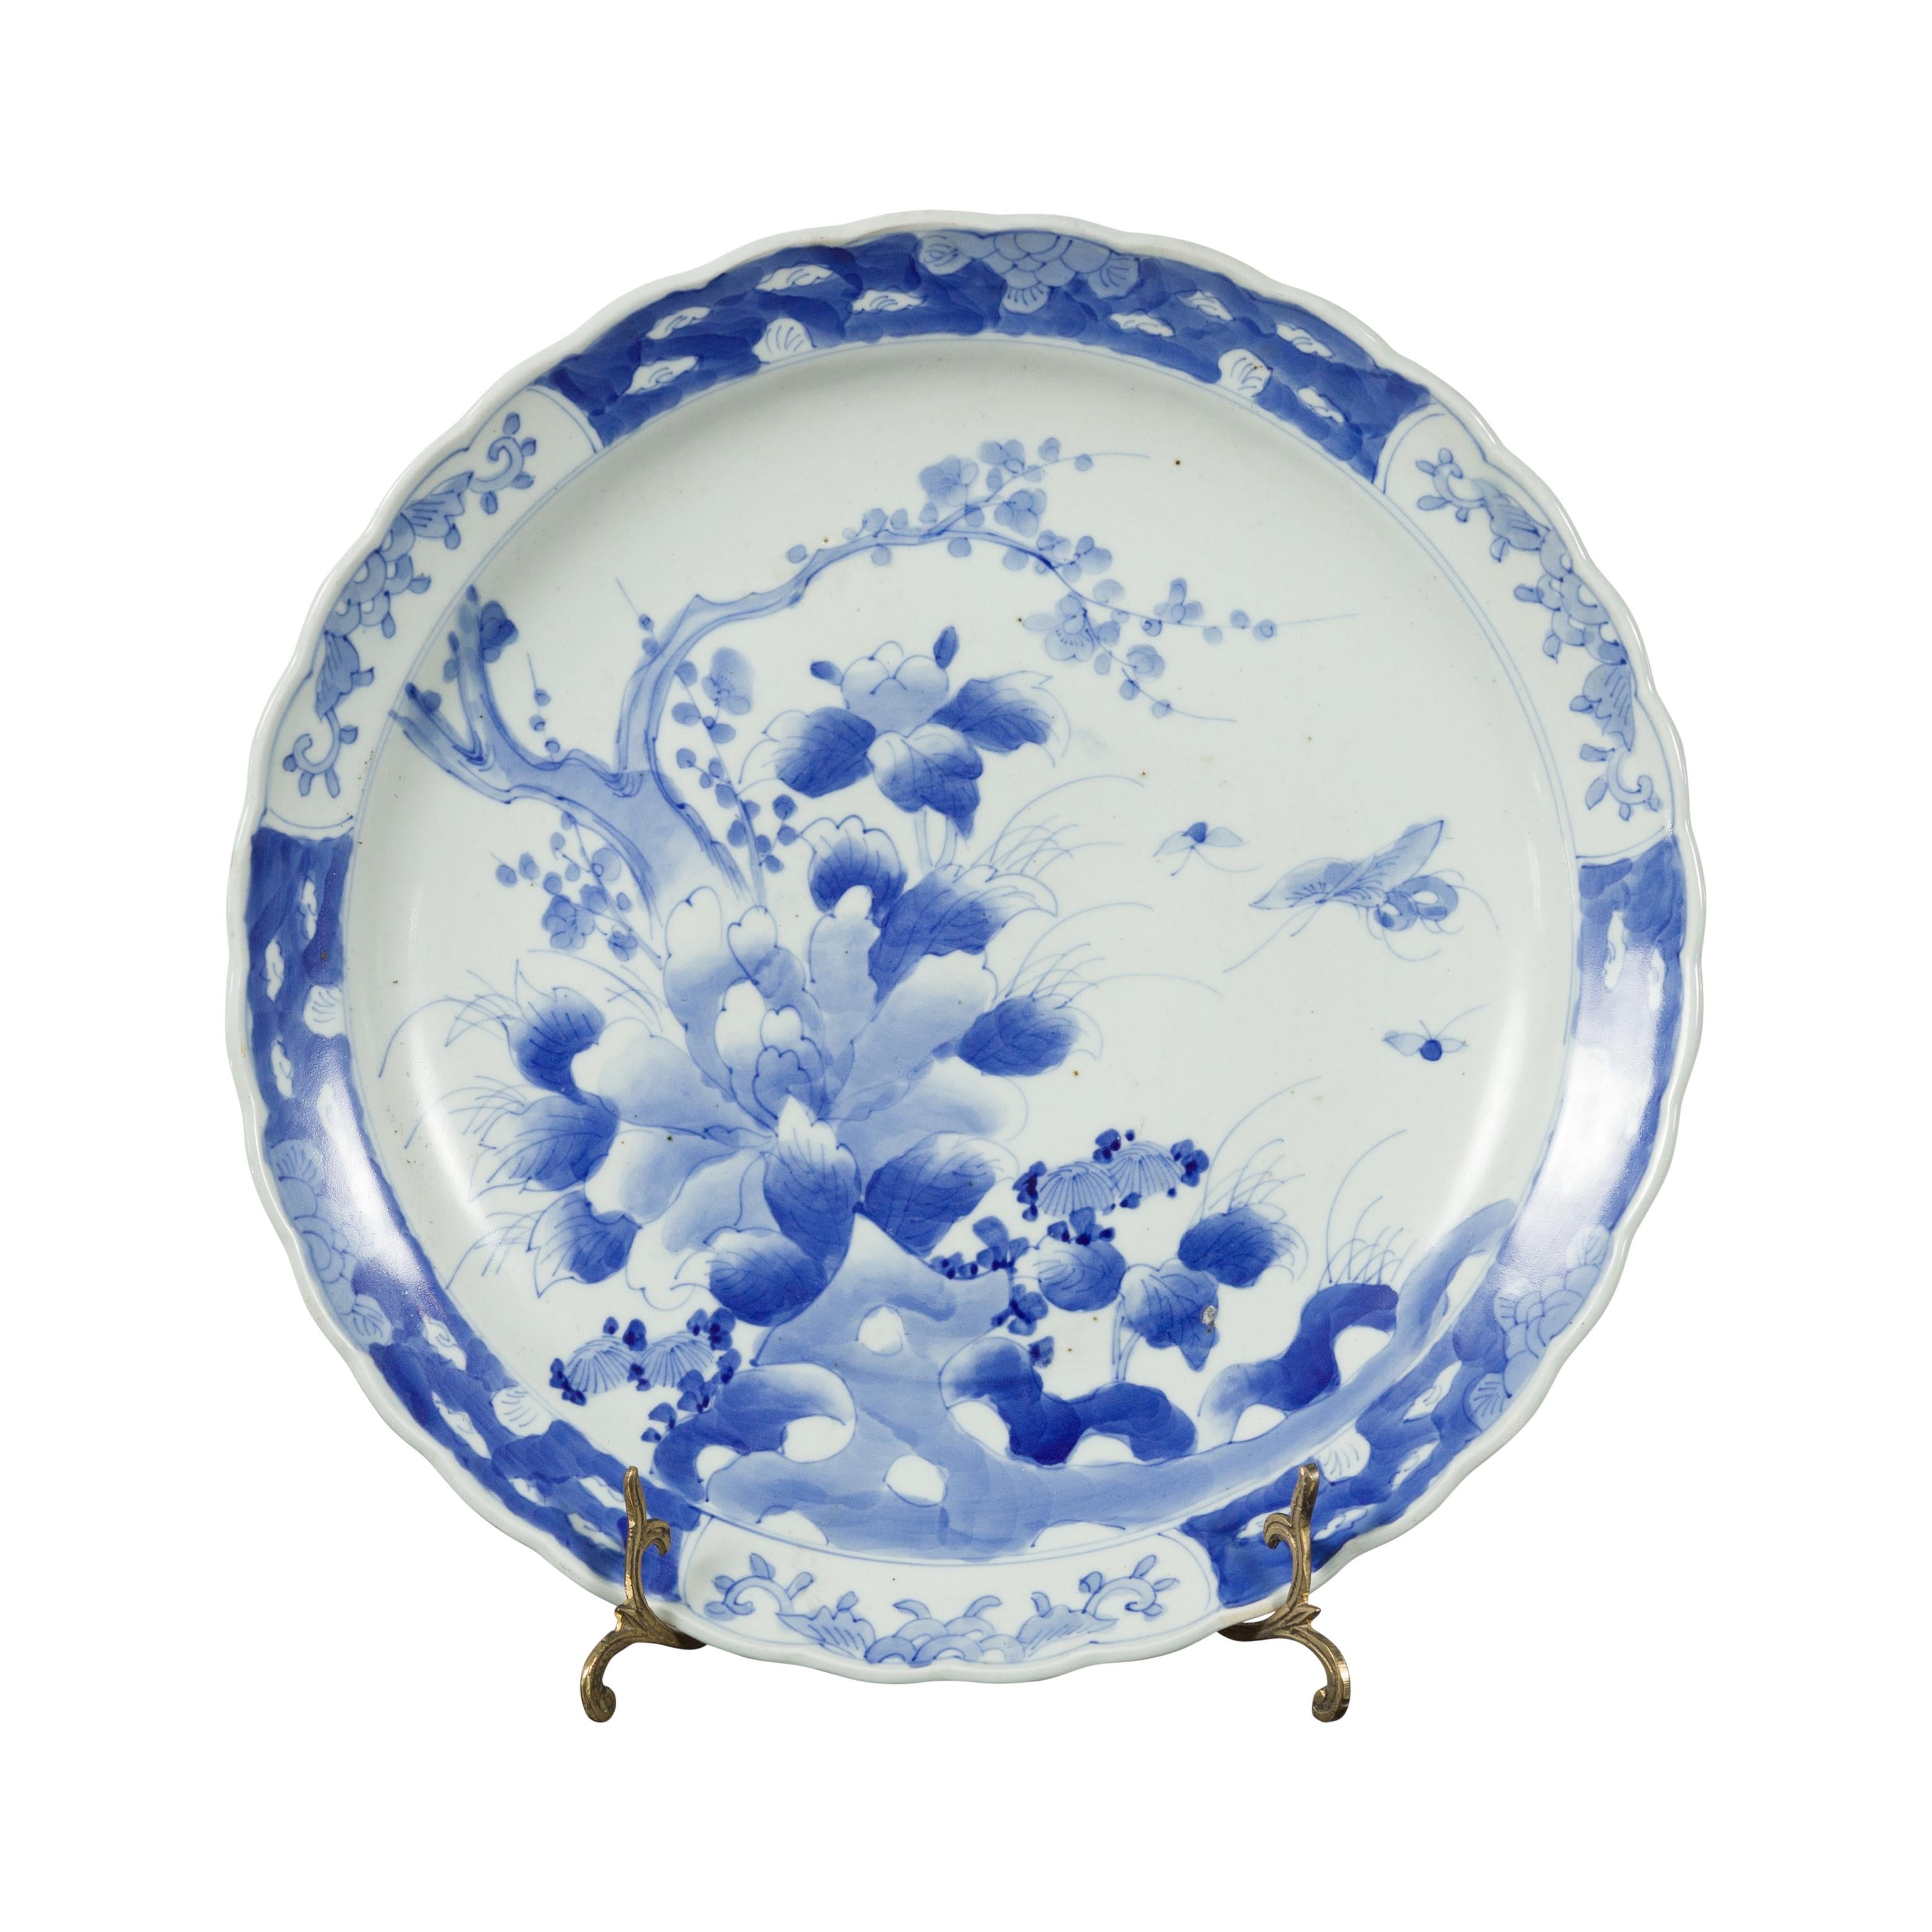 19th Century Japanese Porcelain Imari Plate with Painted Blue and White Décor For Sale 9